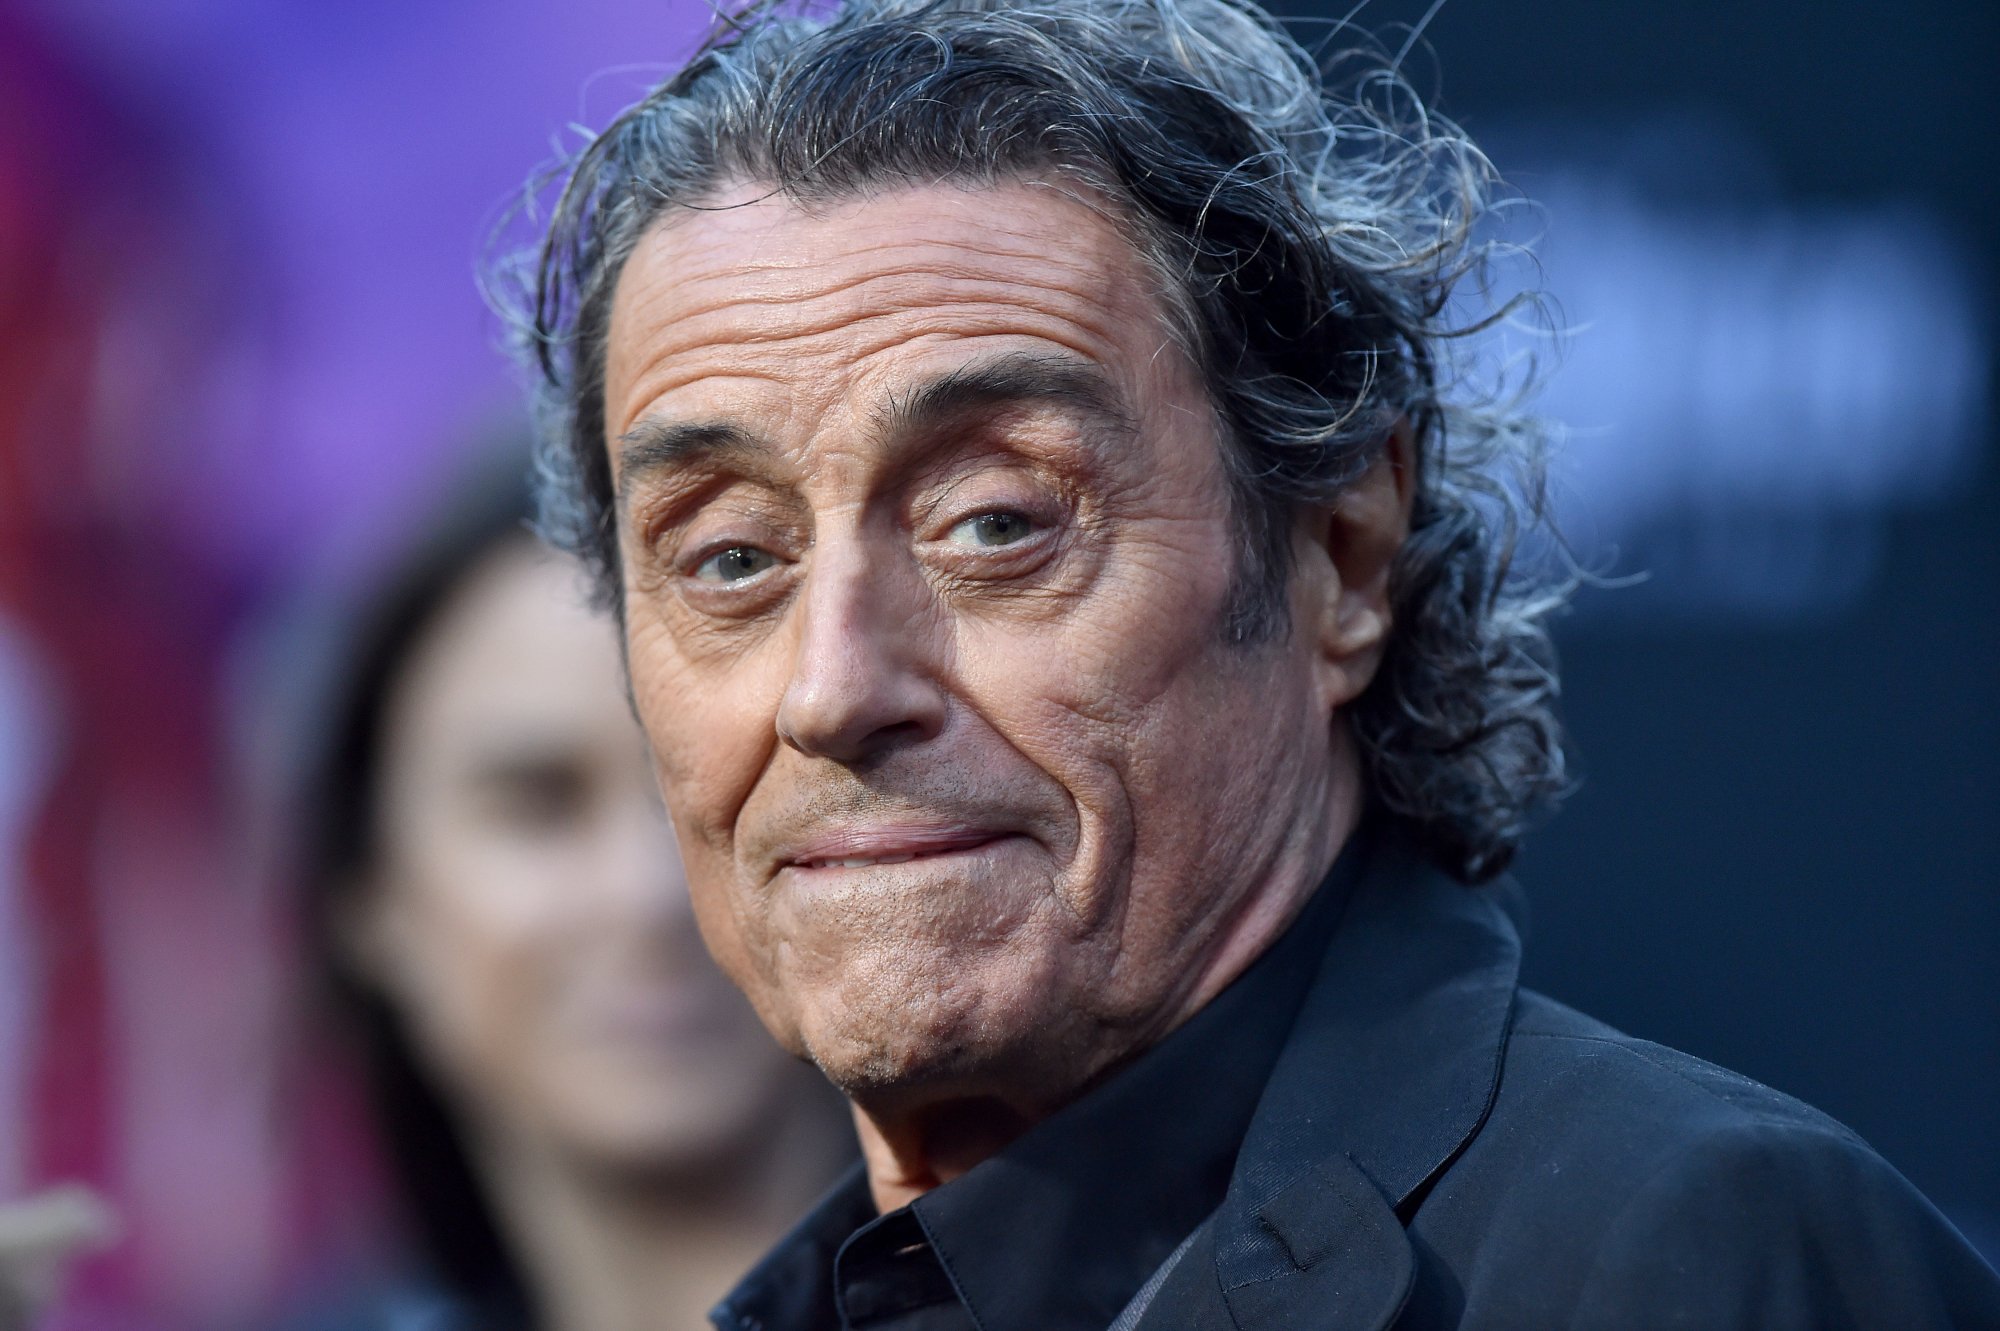 'John Wick' star Ian McShane ahead of 'The Continental' prequel series at a special screening for 'John Wick: Chapter 3 - Parabellum'